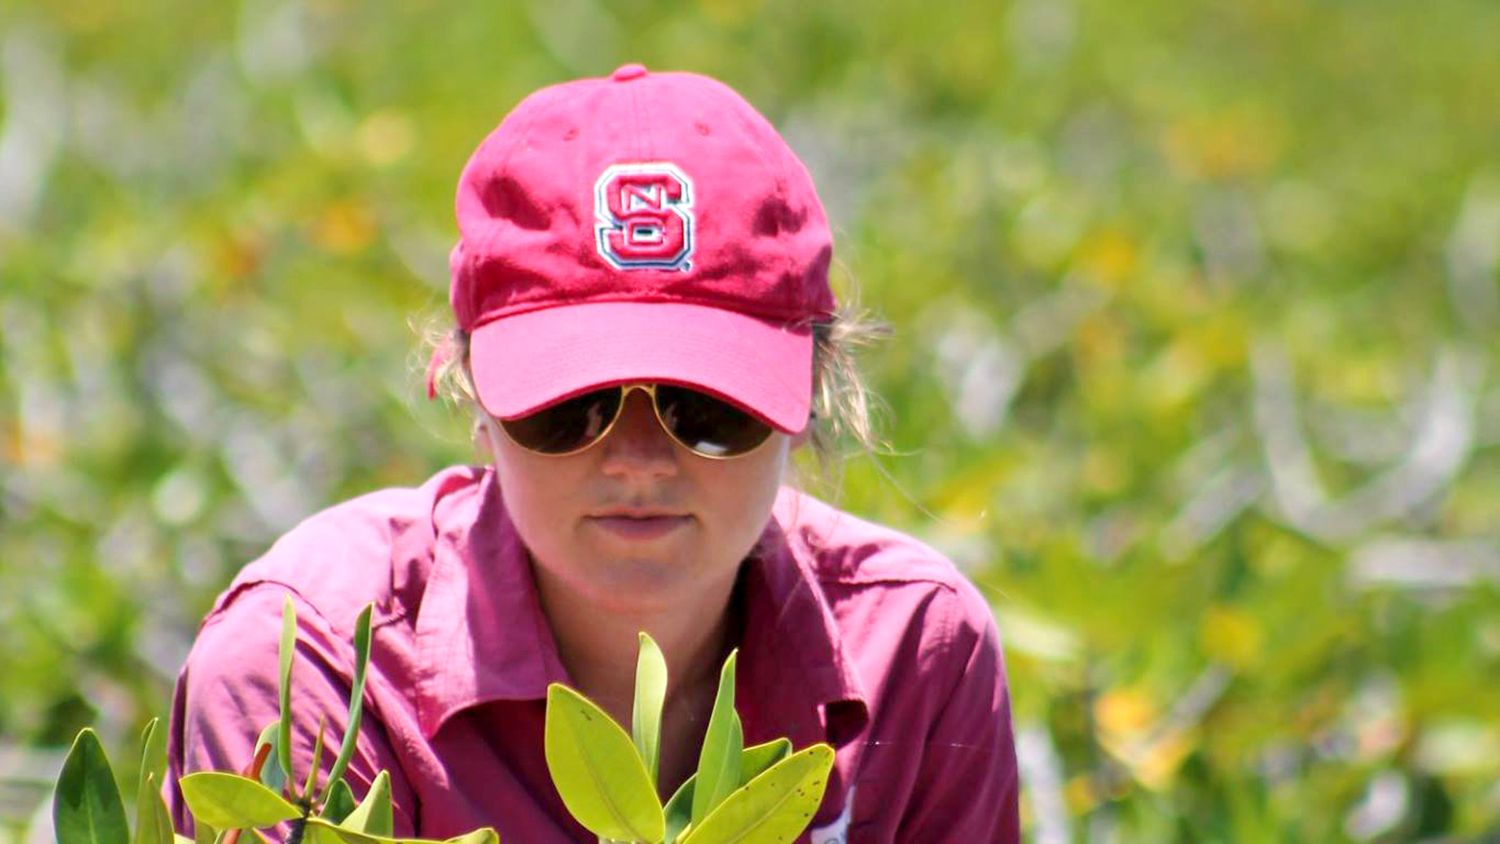 student analyzing crop in field